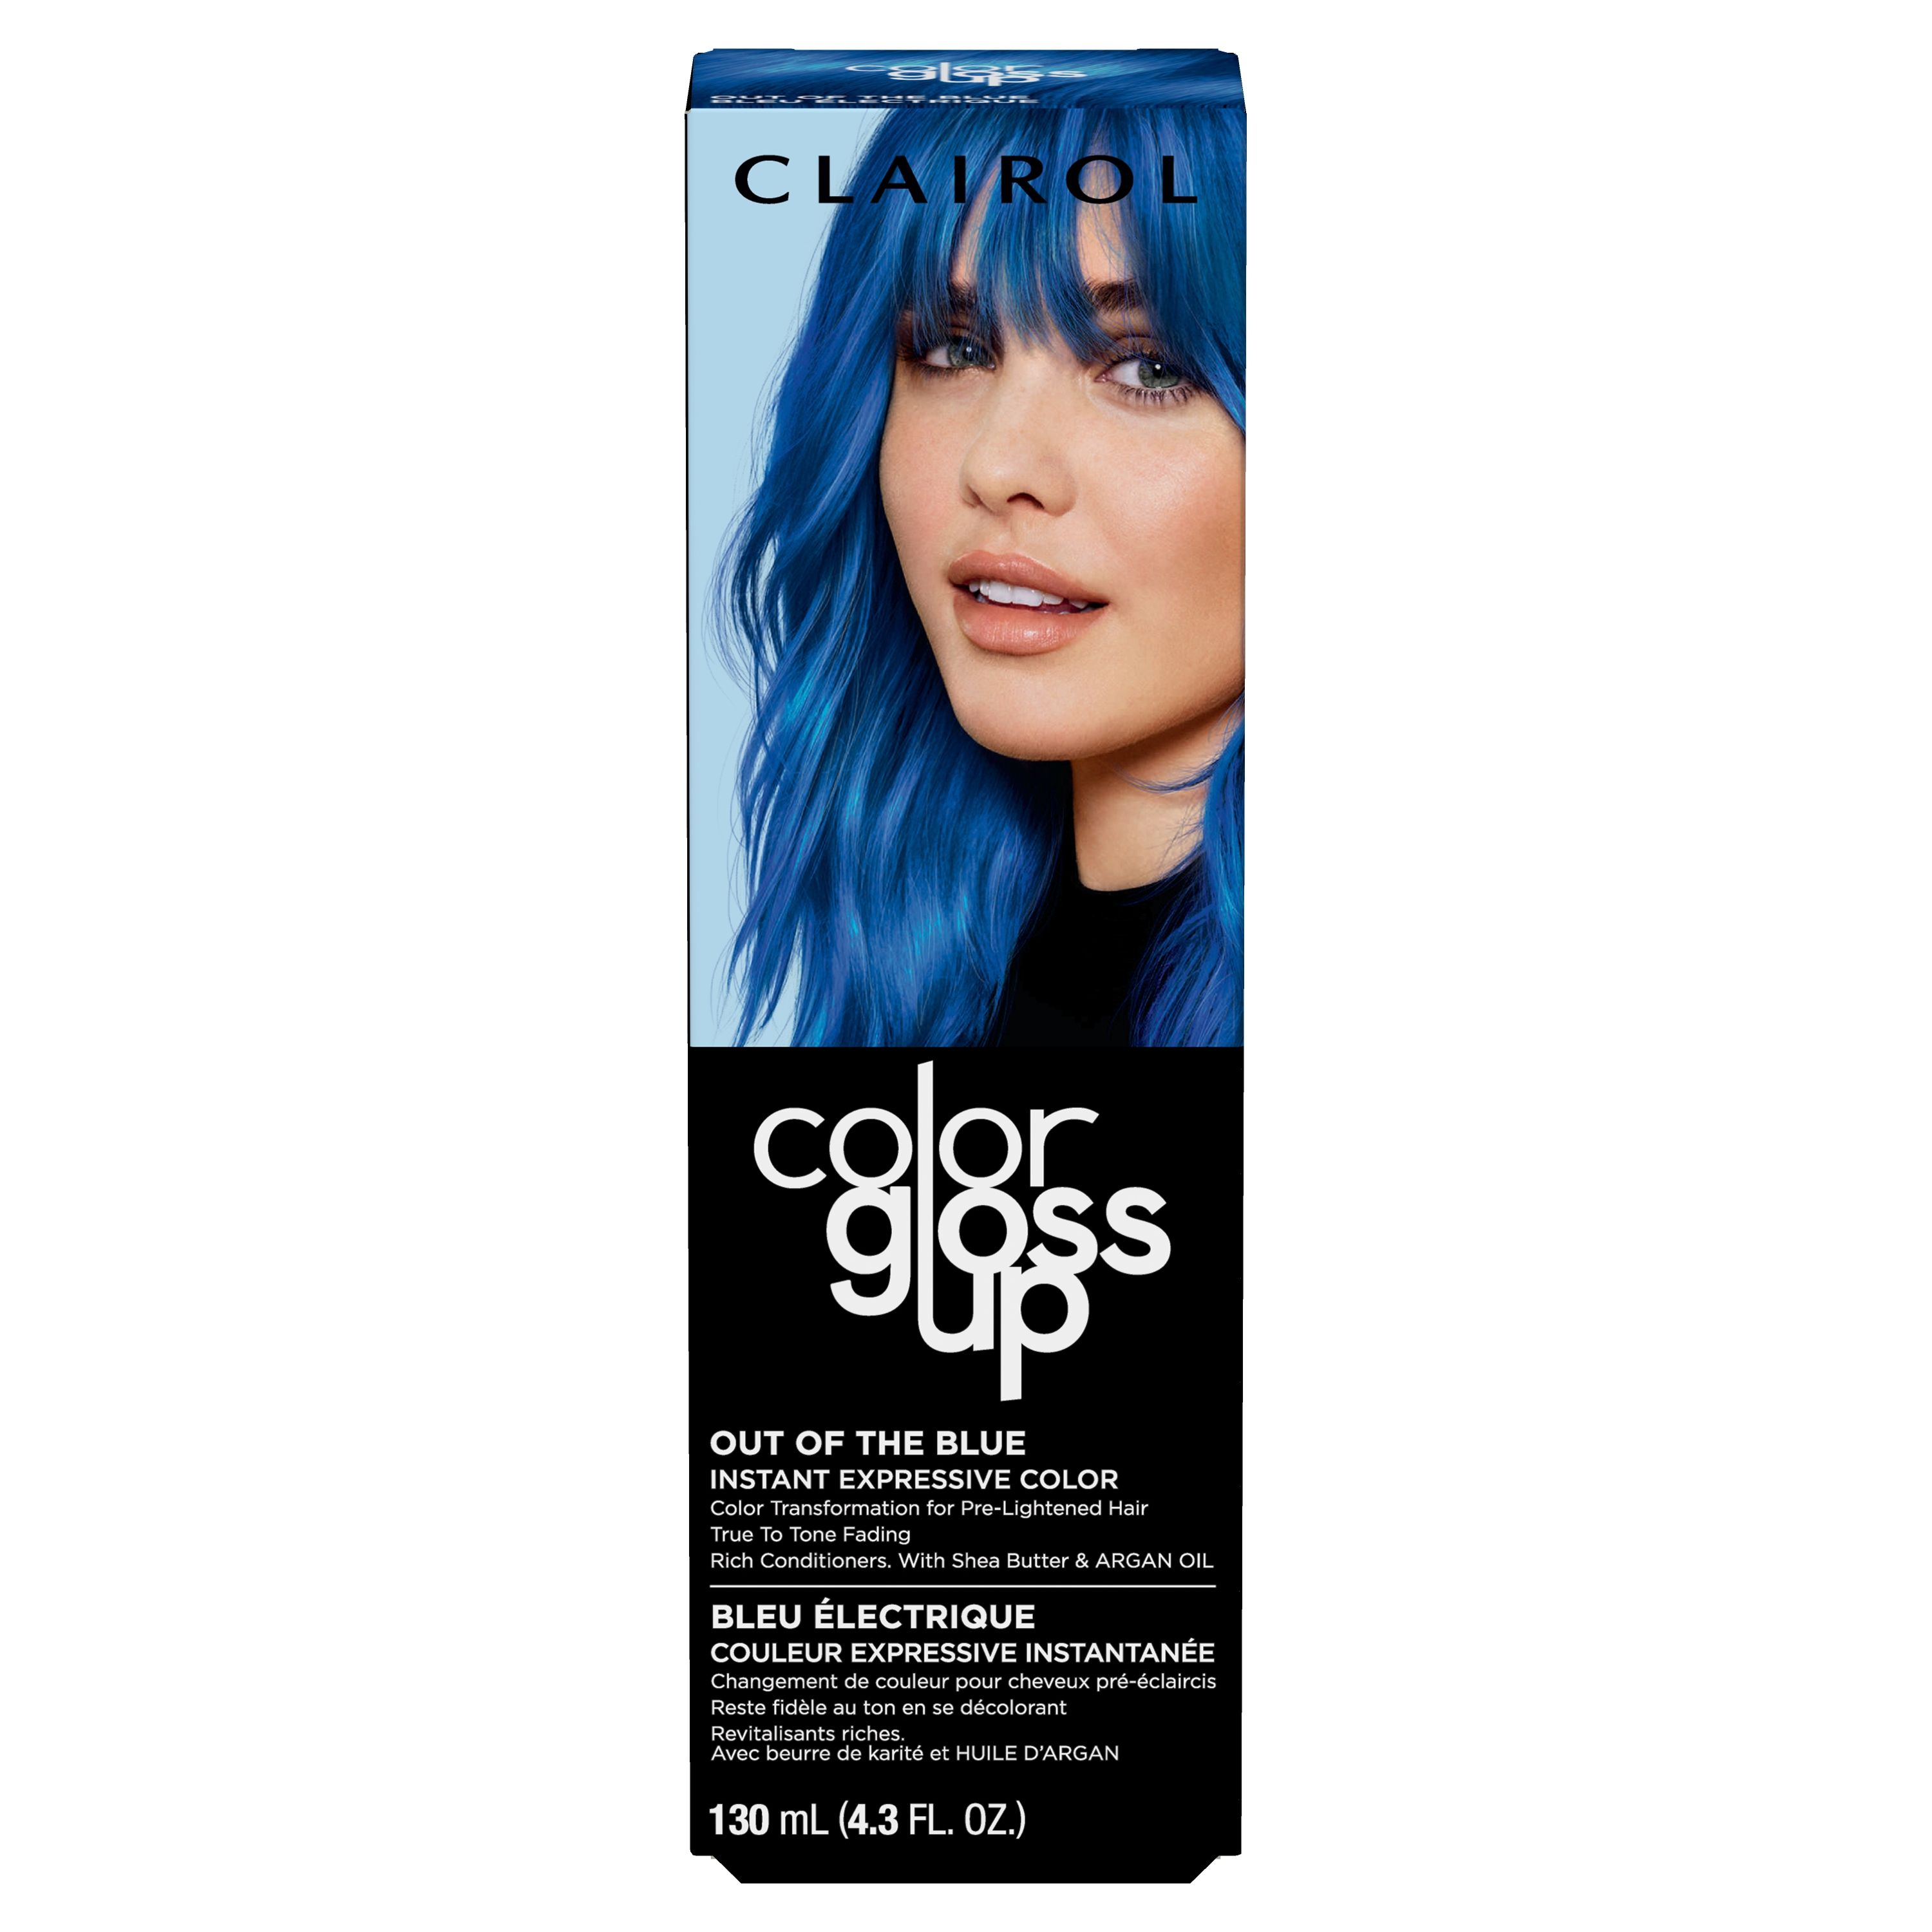 8 Best Temporary Hair Dyes, According to Experts